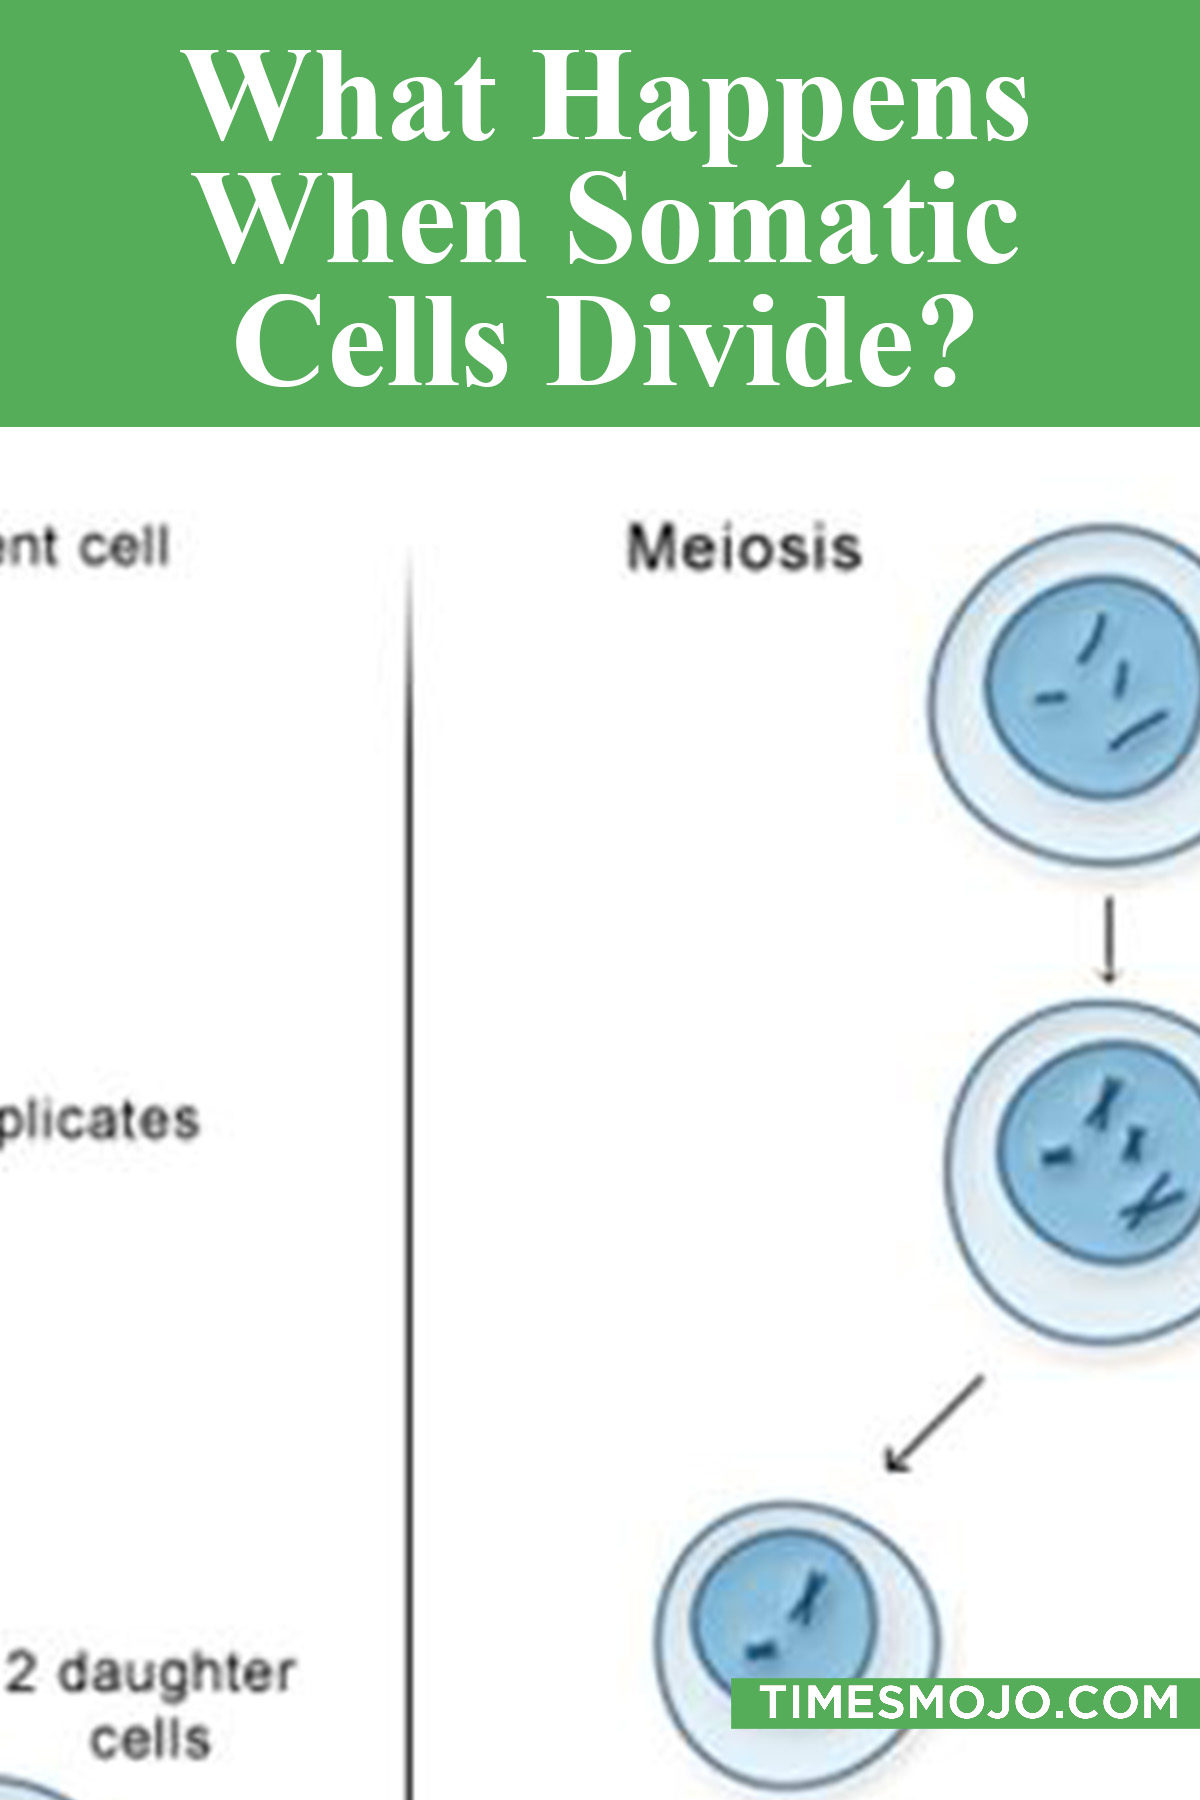 What Happens When Somatic Cells Divide